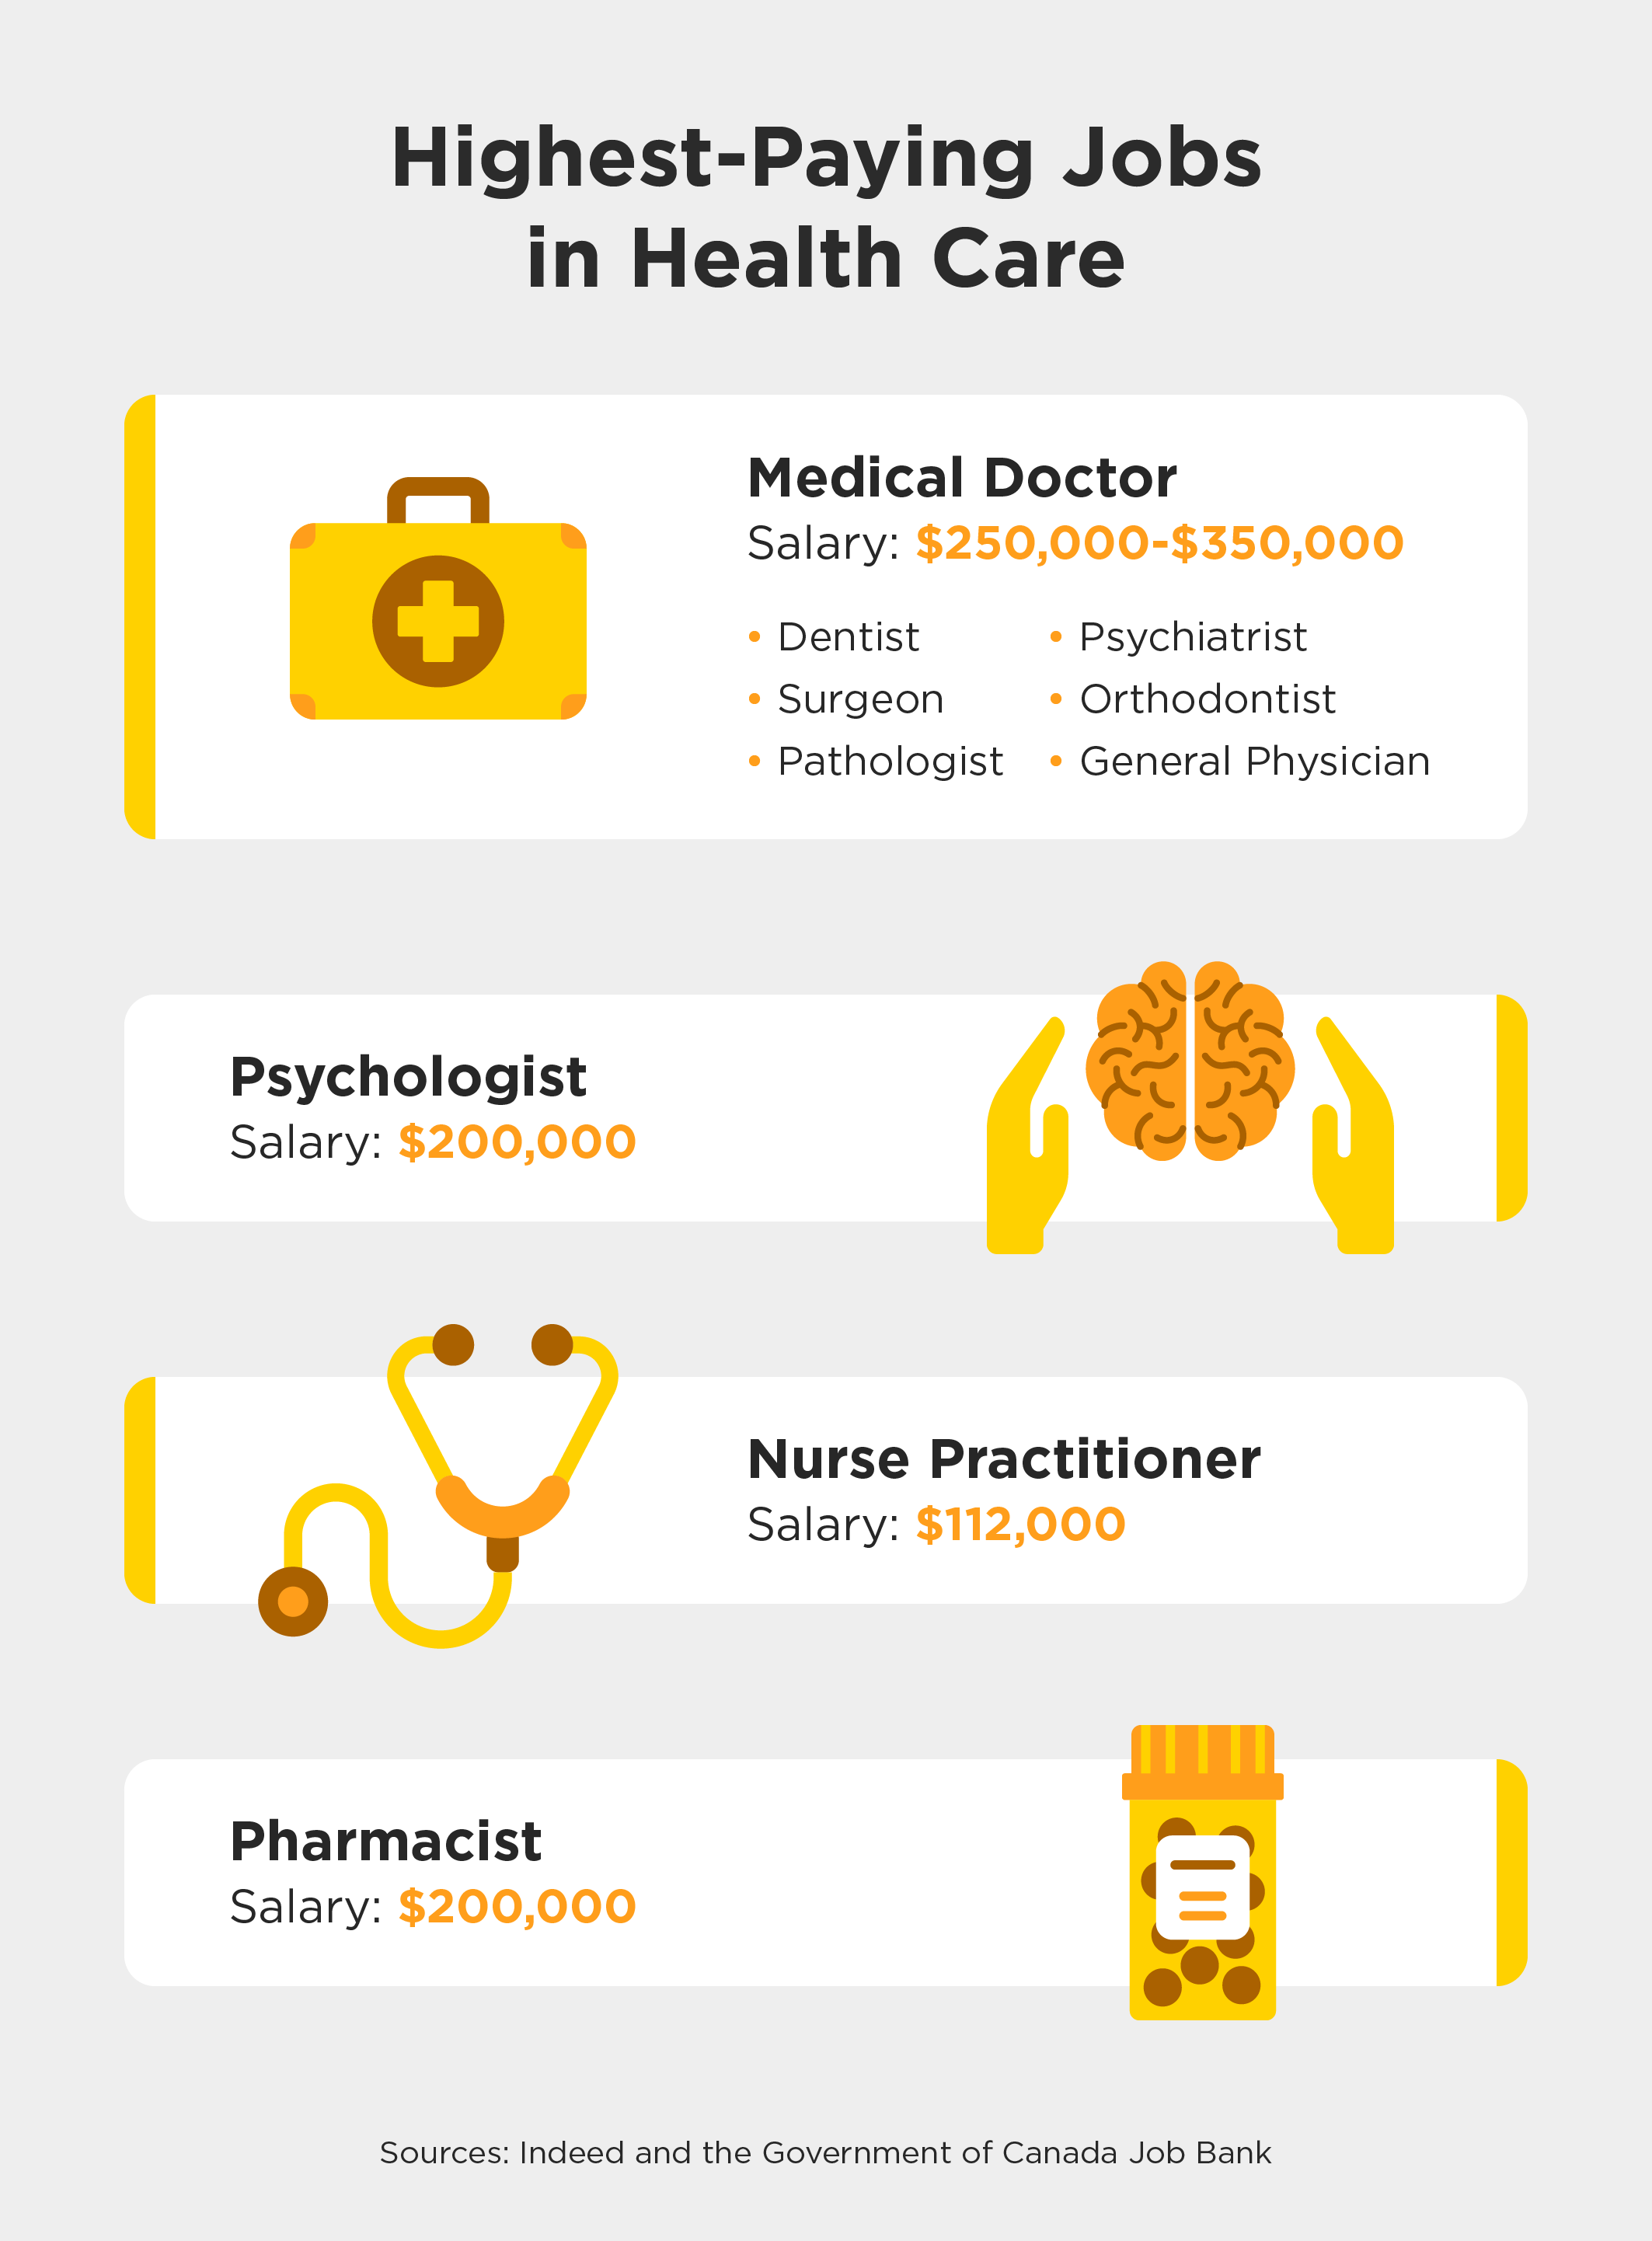 A list of the highest-paying health care jobs in Canada, including Medical Doctors, Psychologists, Nurse Practitioners, and Pharmacists.